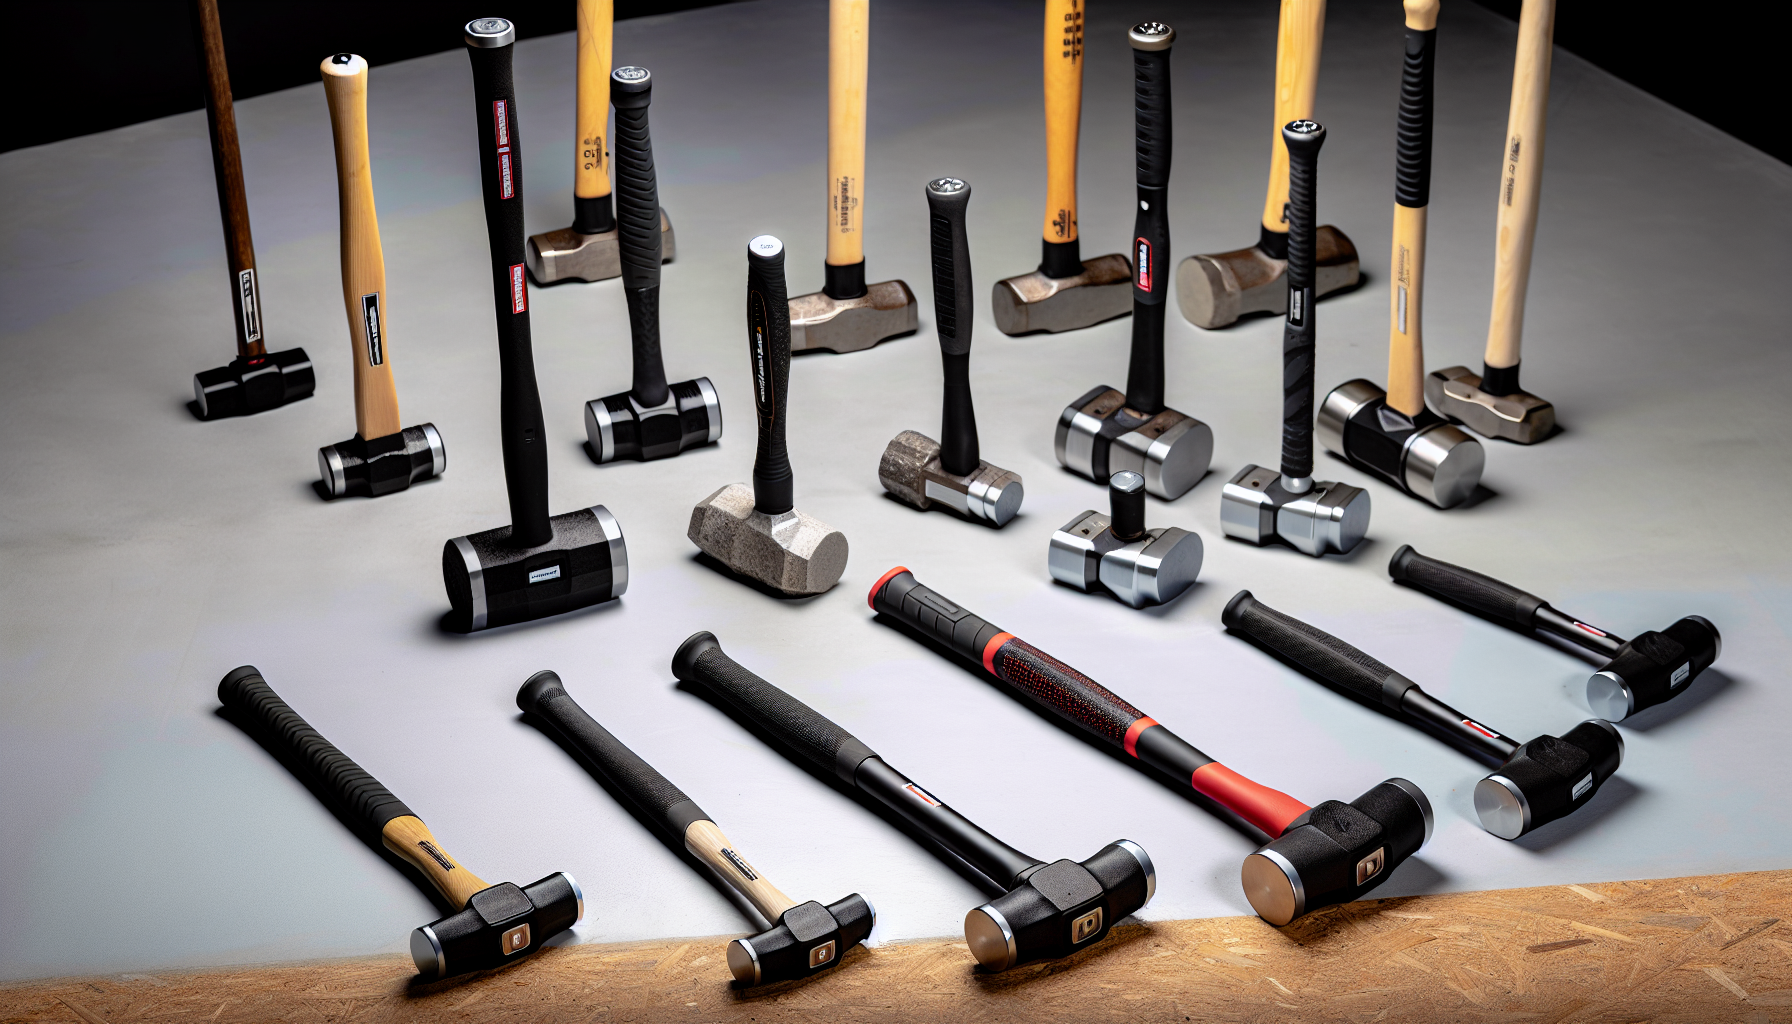 Comparison of different sledge hammers showcasing balance and control